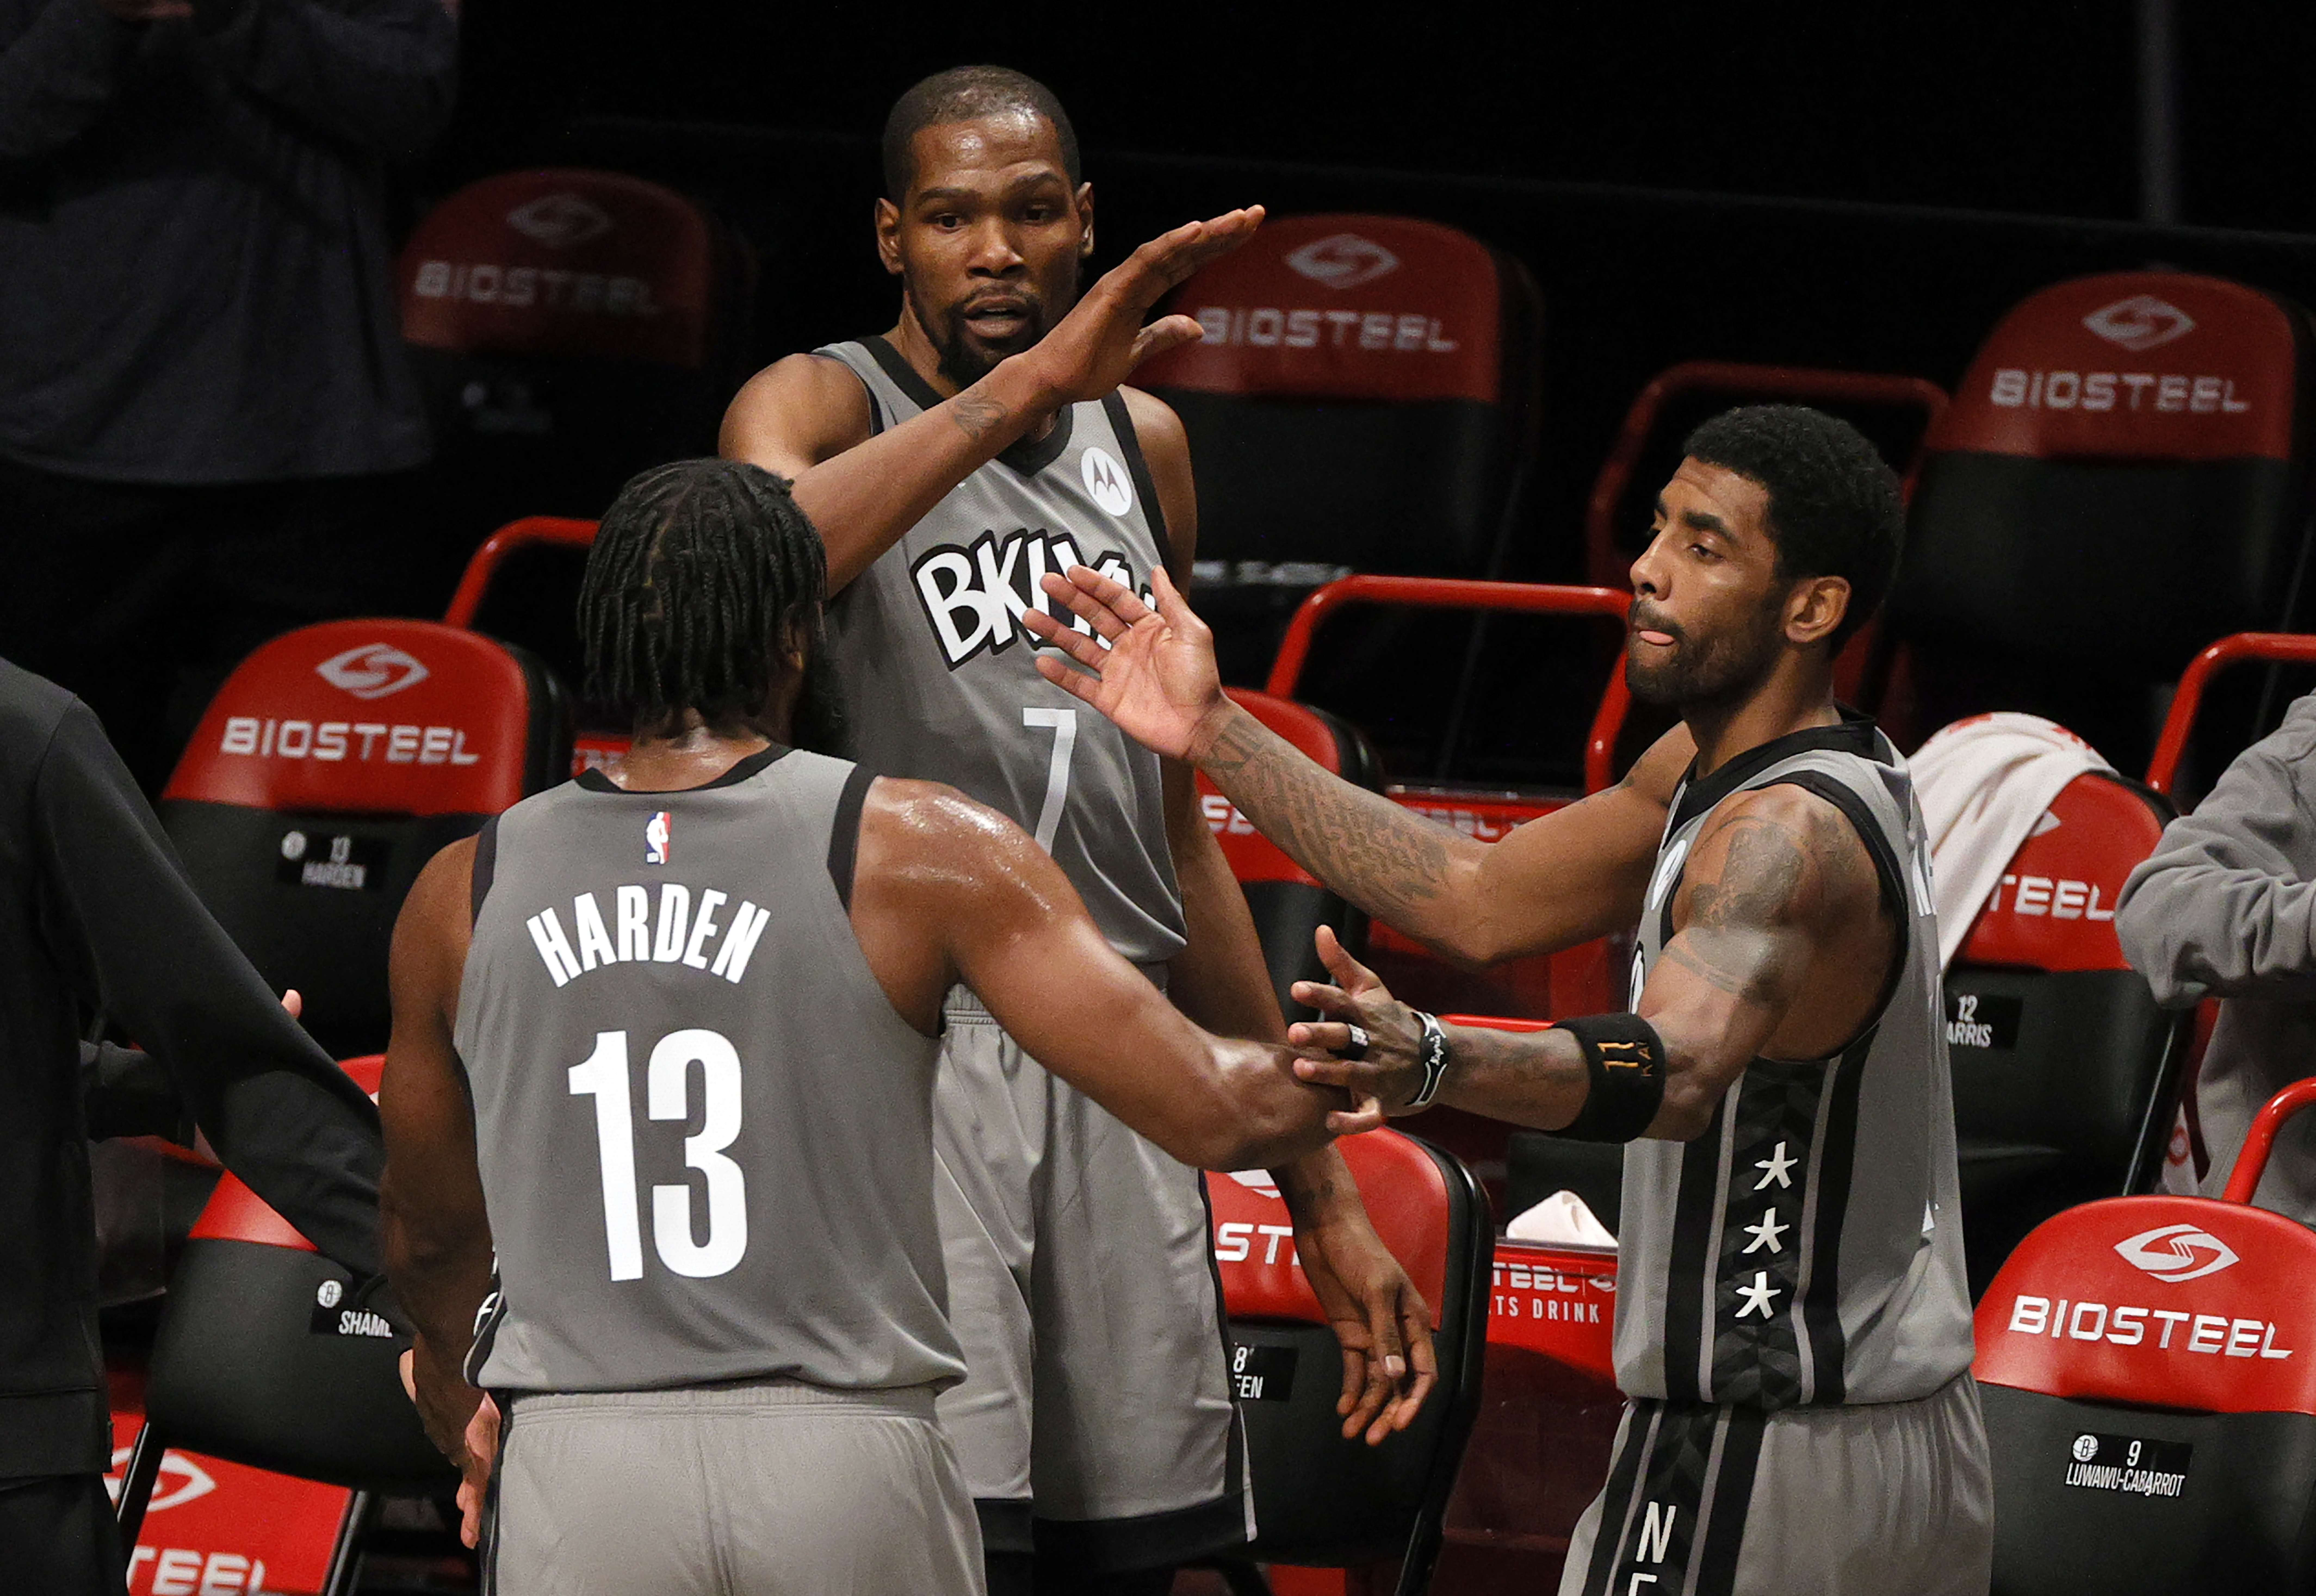 NEW YORK, NEW YORK - JANUARY 25: James Harden #13, Kevin Durant #7, and Kyrie Irving #11 of the Brooklyn Nets high-five after coming off the court during the second half against the Miami Heat at Barclays Center on January 25, 2021 in the Brooklyn borough of New York City. The Nets won 98-85. Sarah Stier/Getty Images